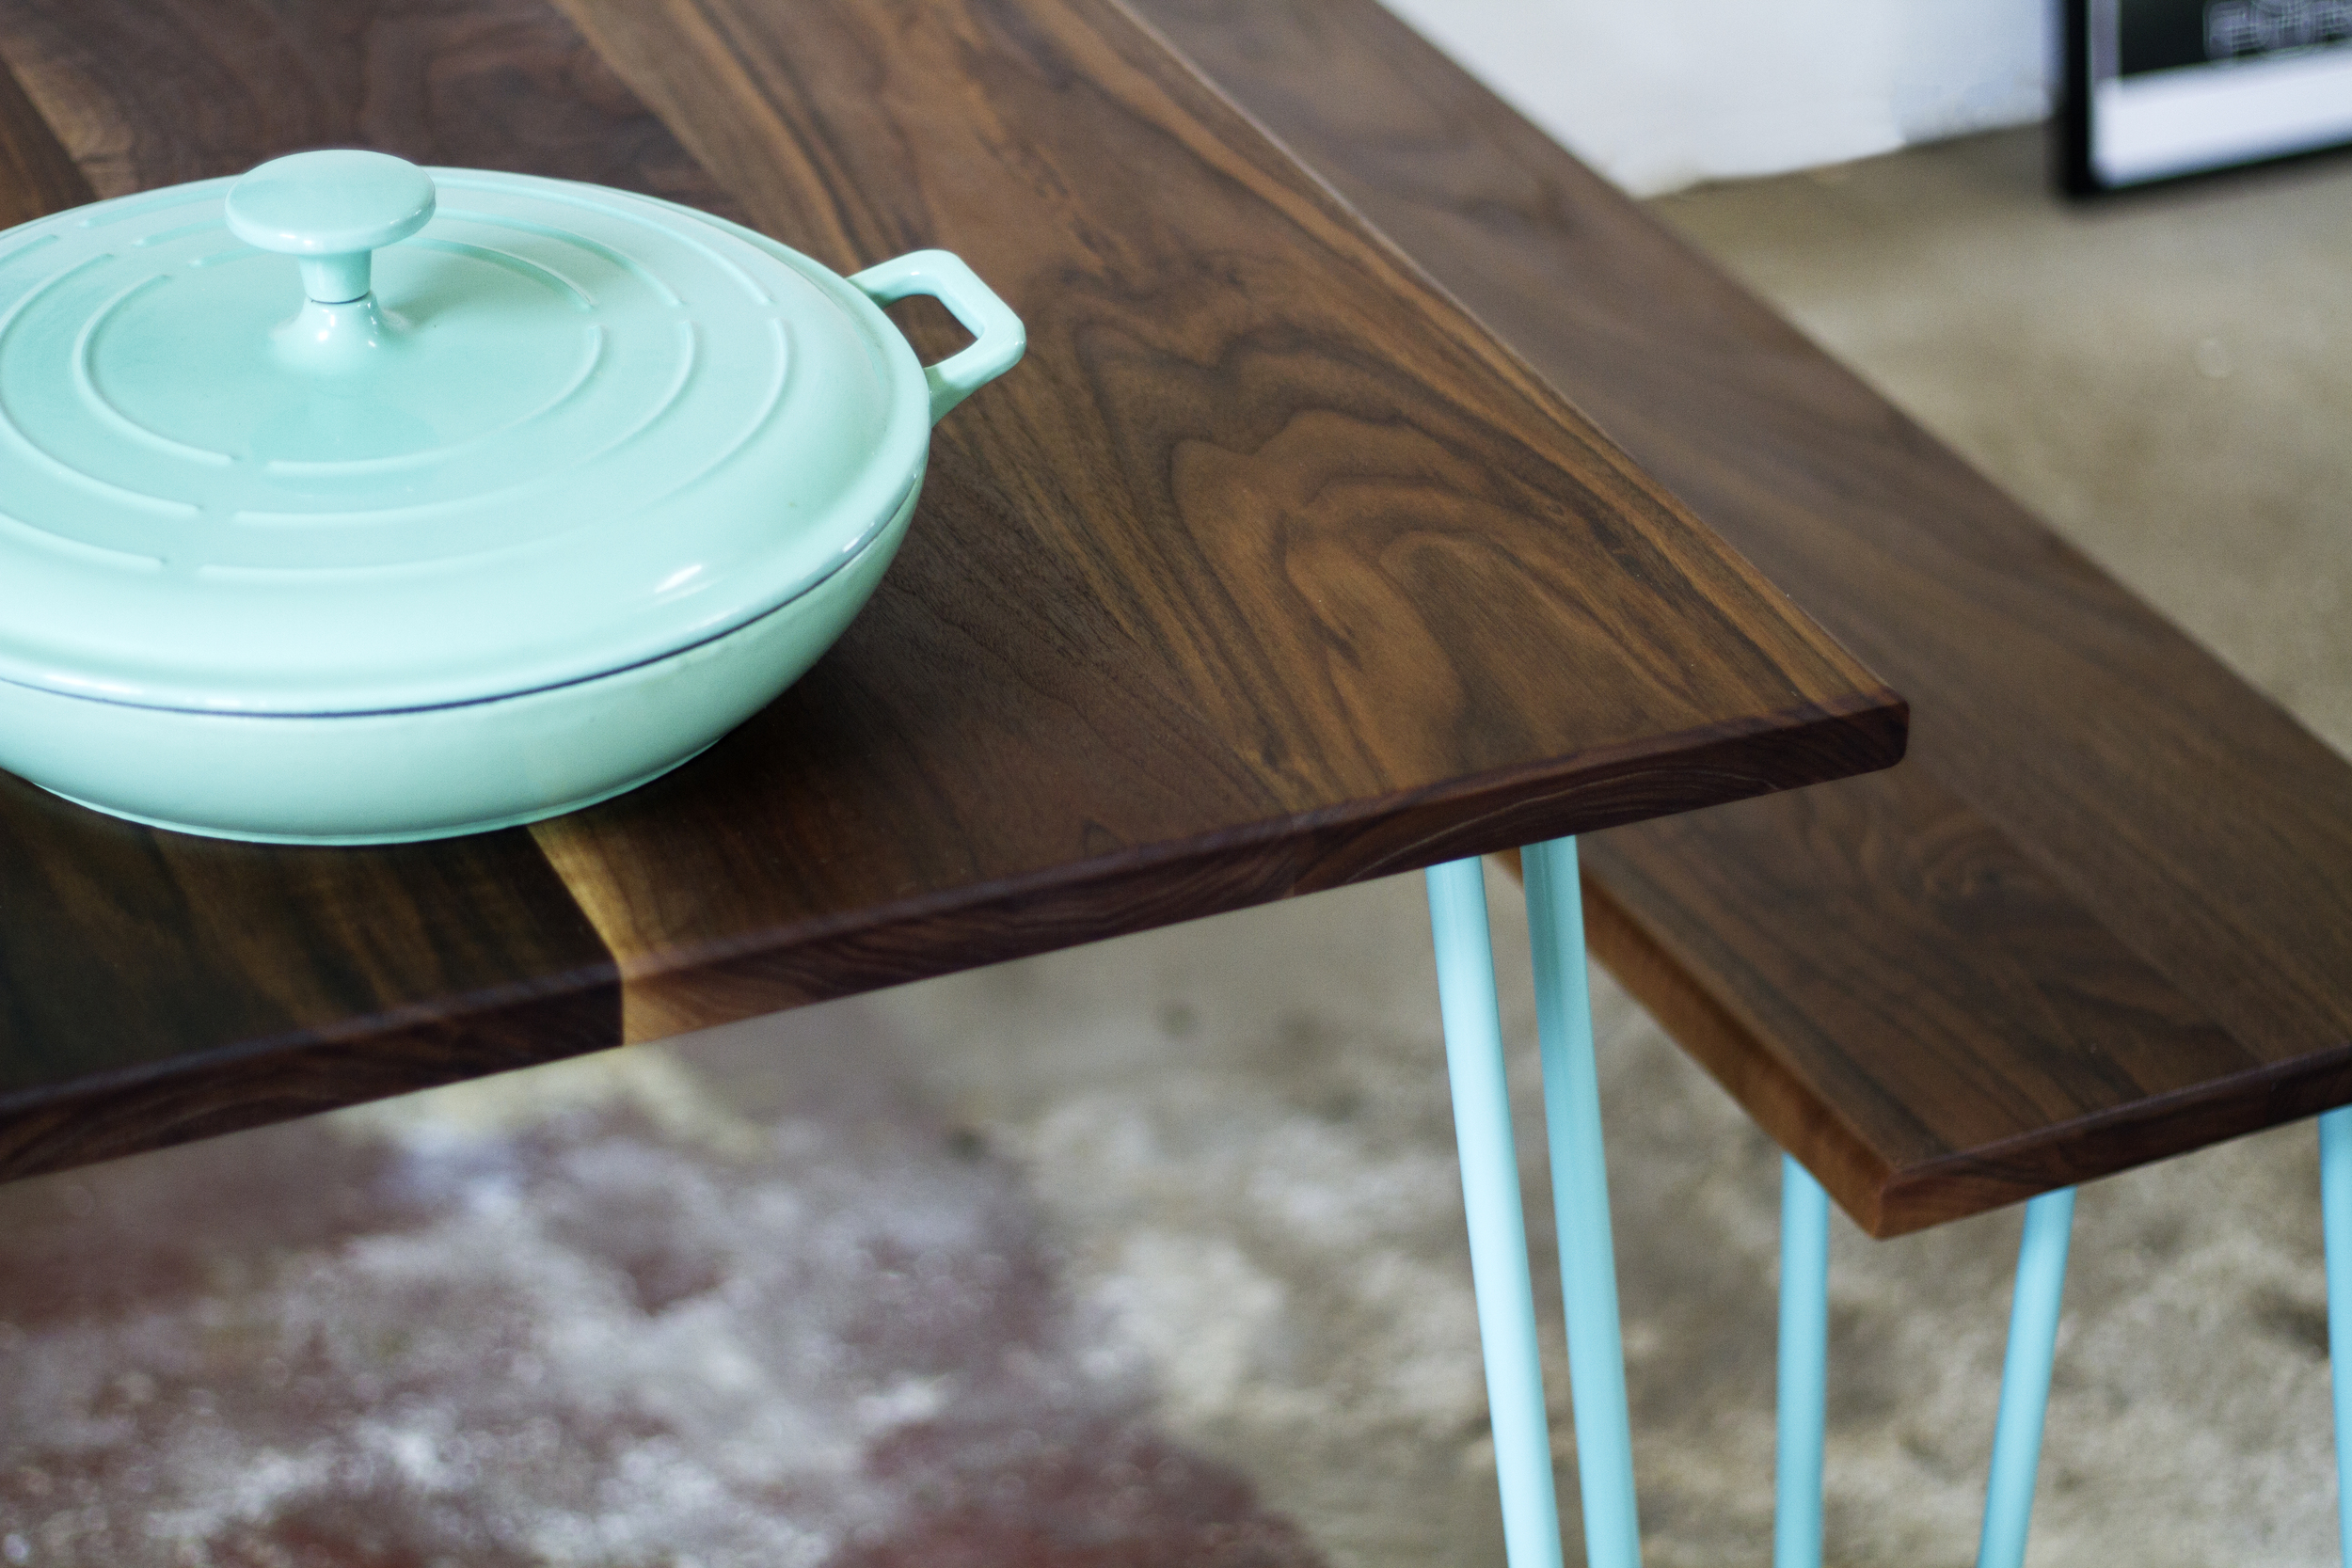 Walnut wood Dining table and bench by Cord Industries (shown with steel hairpin legs in turquoise).